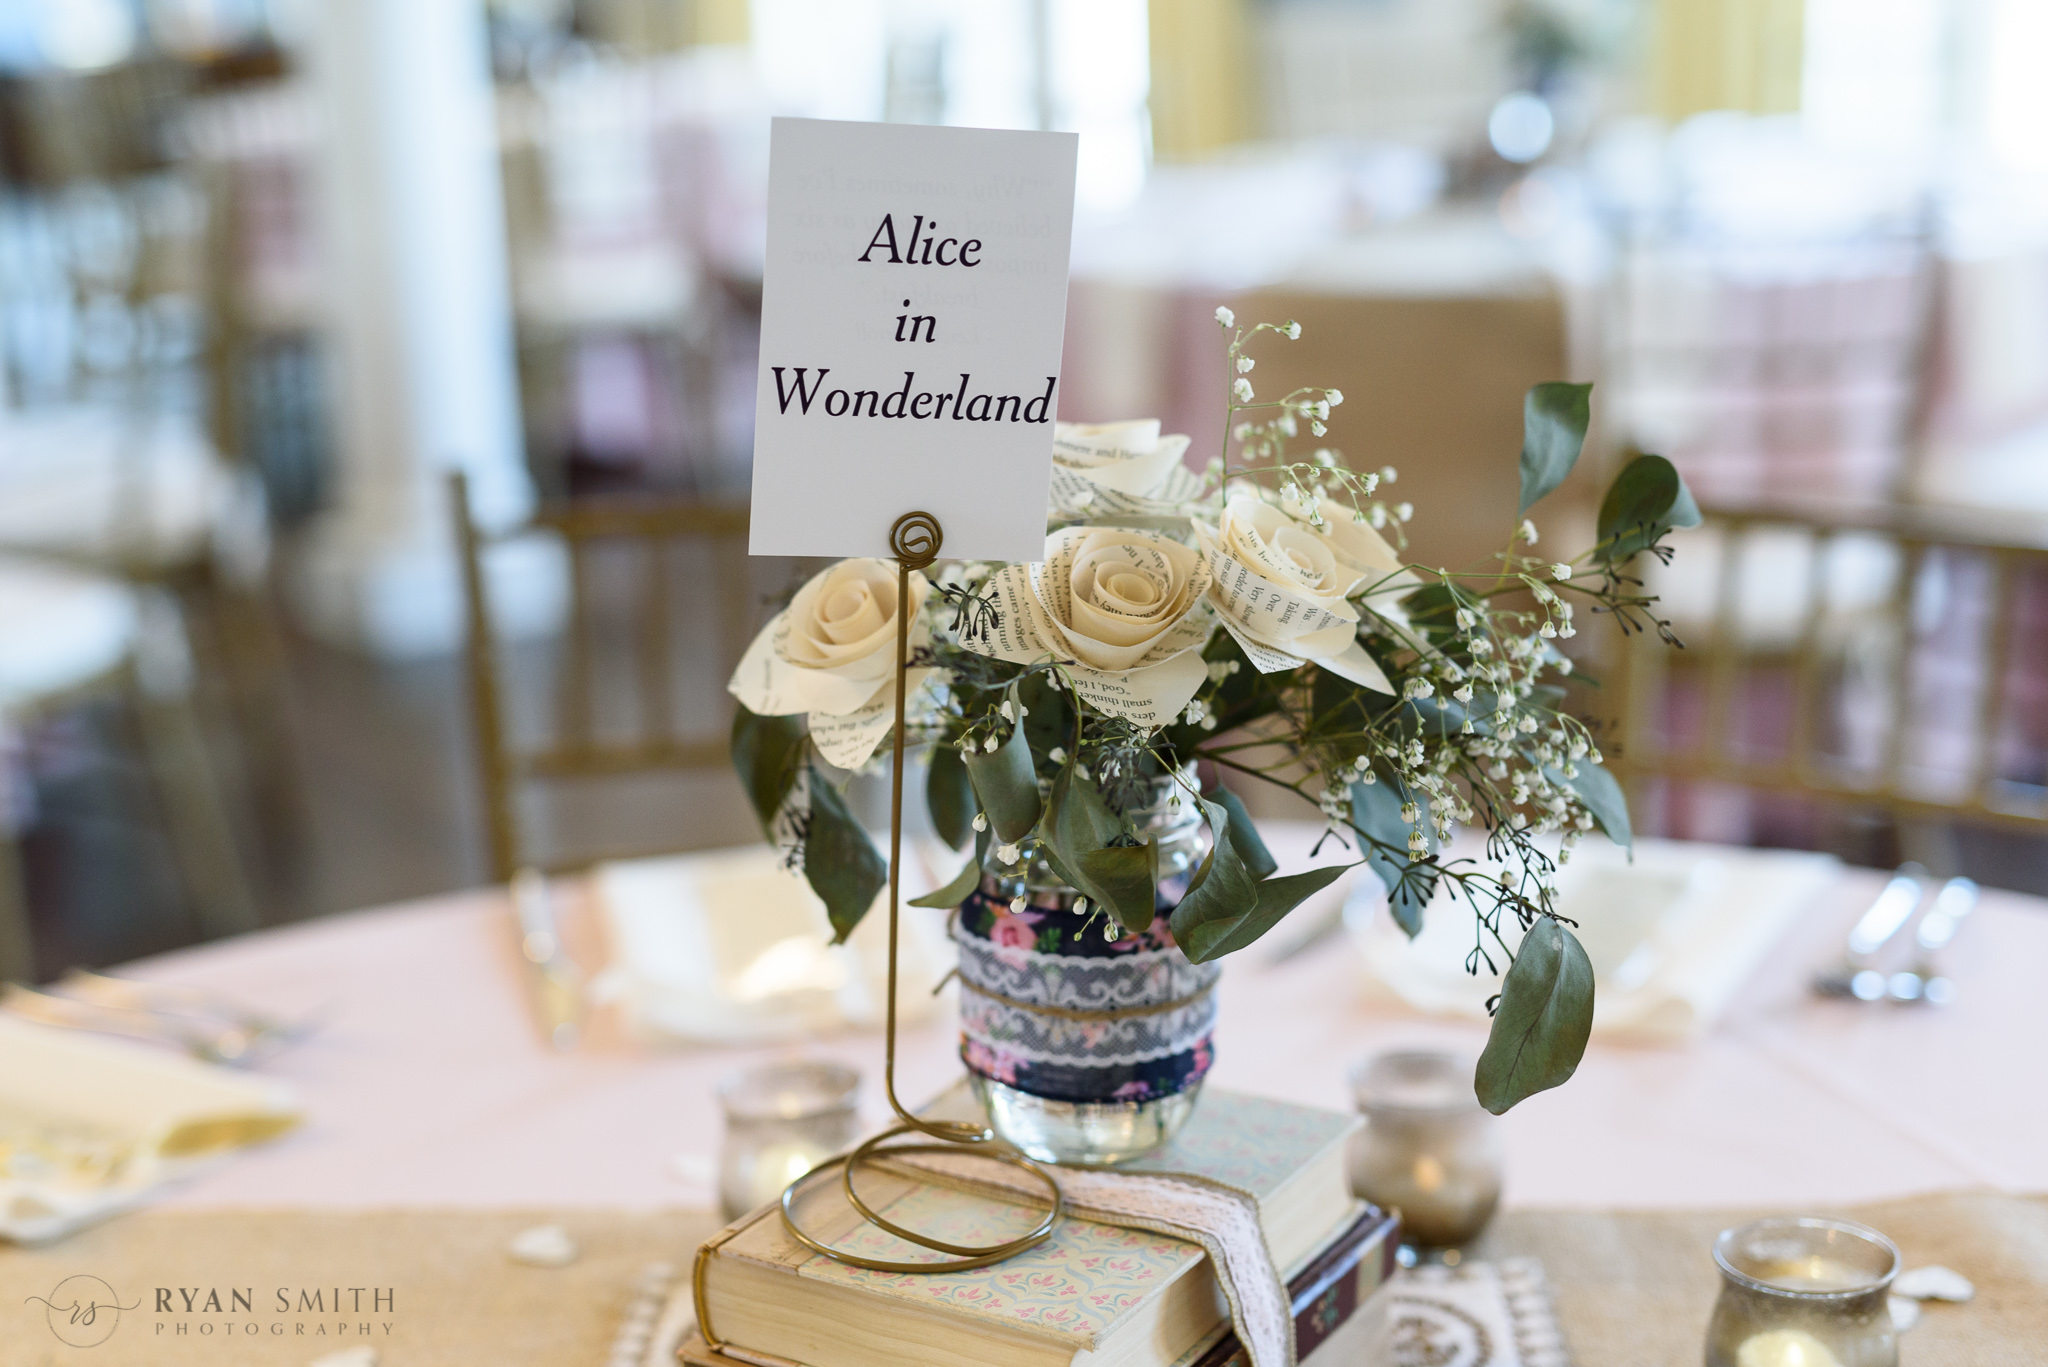 Table decorations with flowers made from book pages - Pine Lakes Country Club